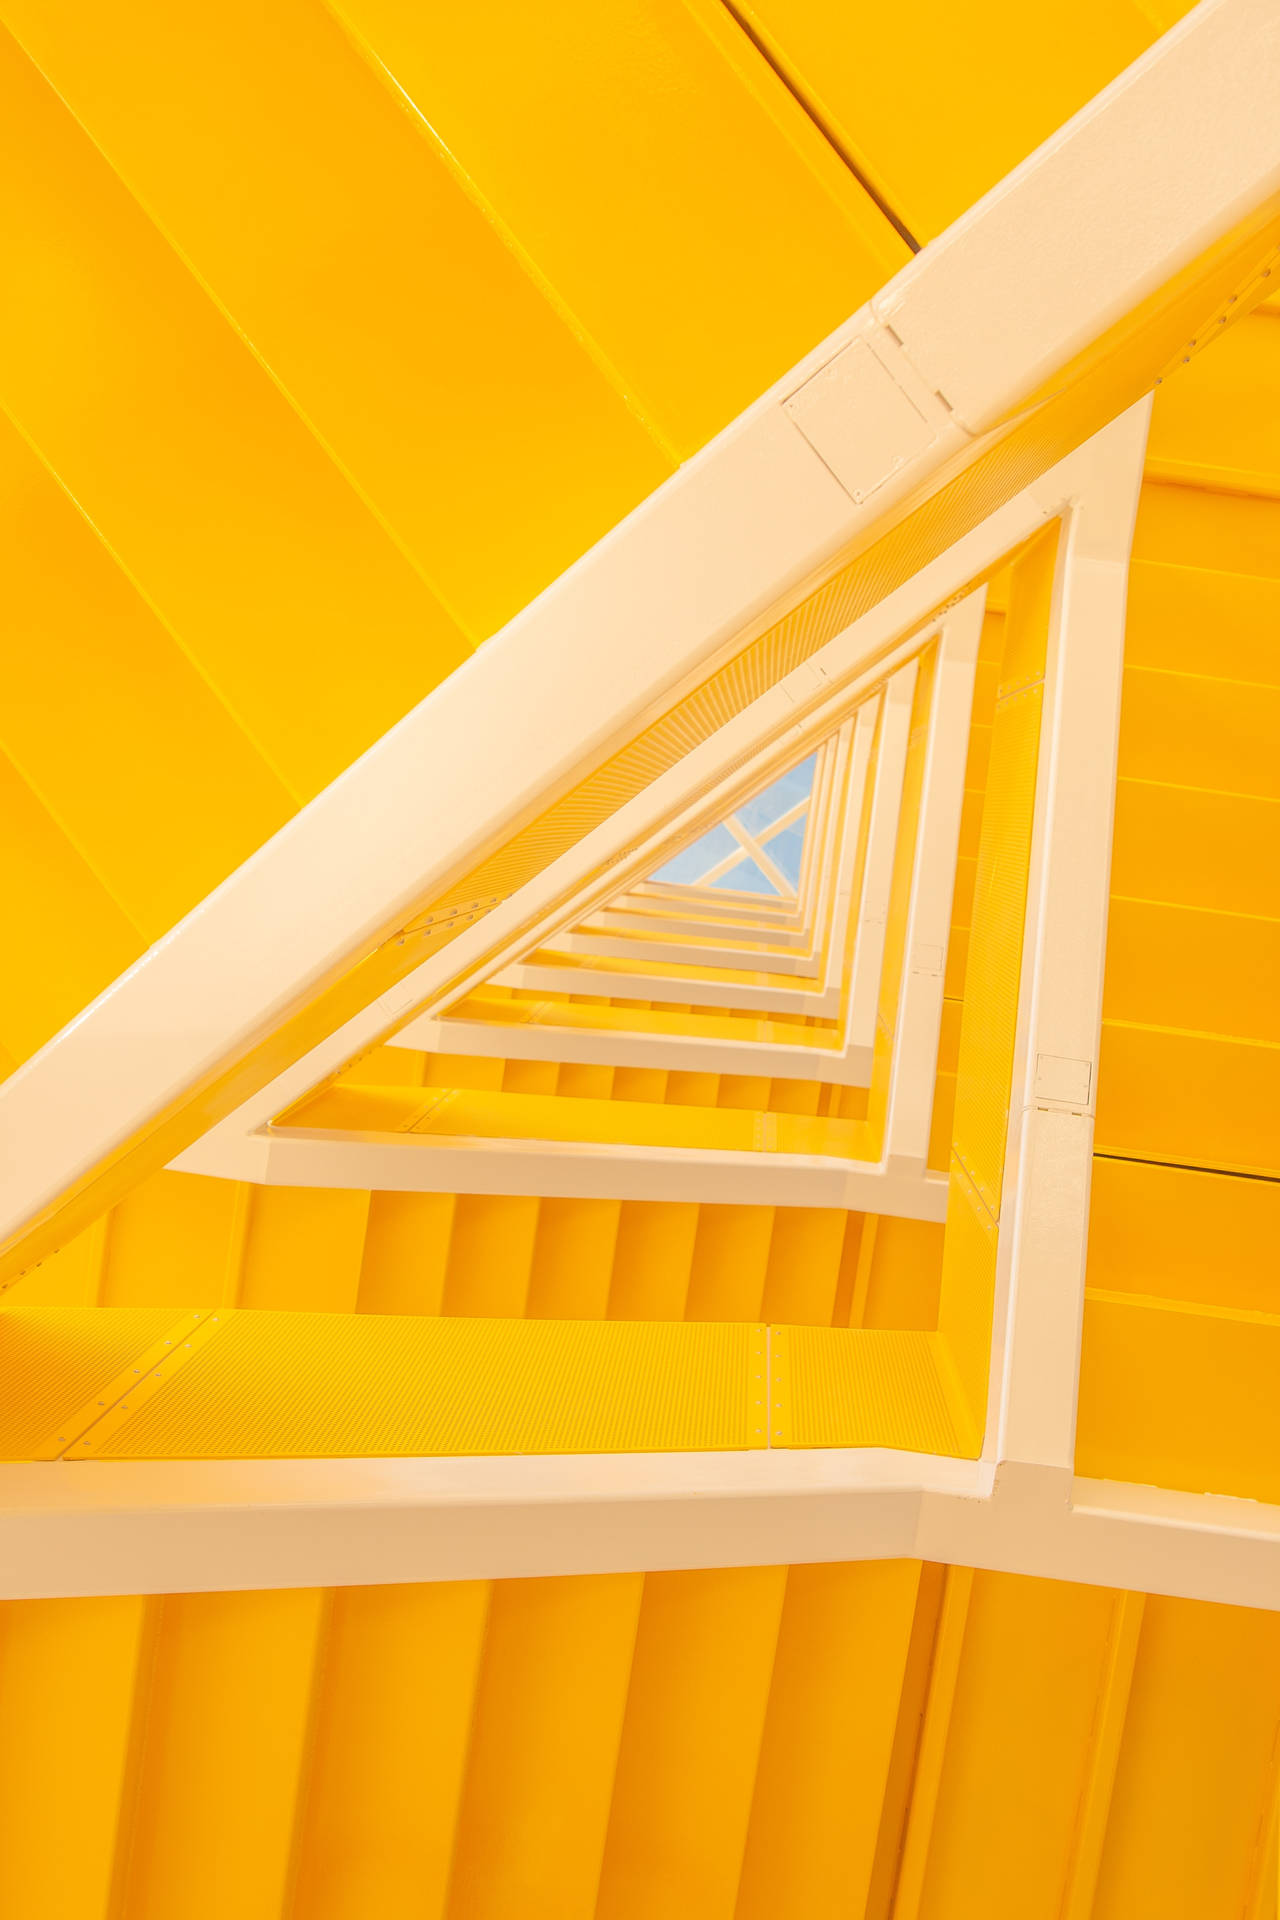 Stairs Yellow Hd Iphone Wallpaper